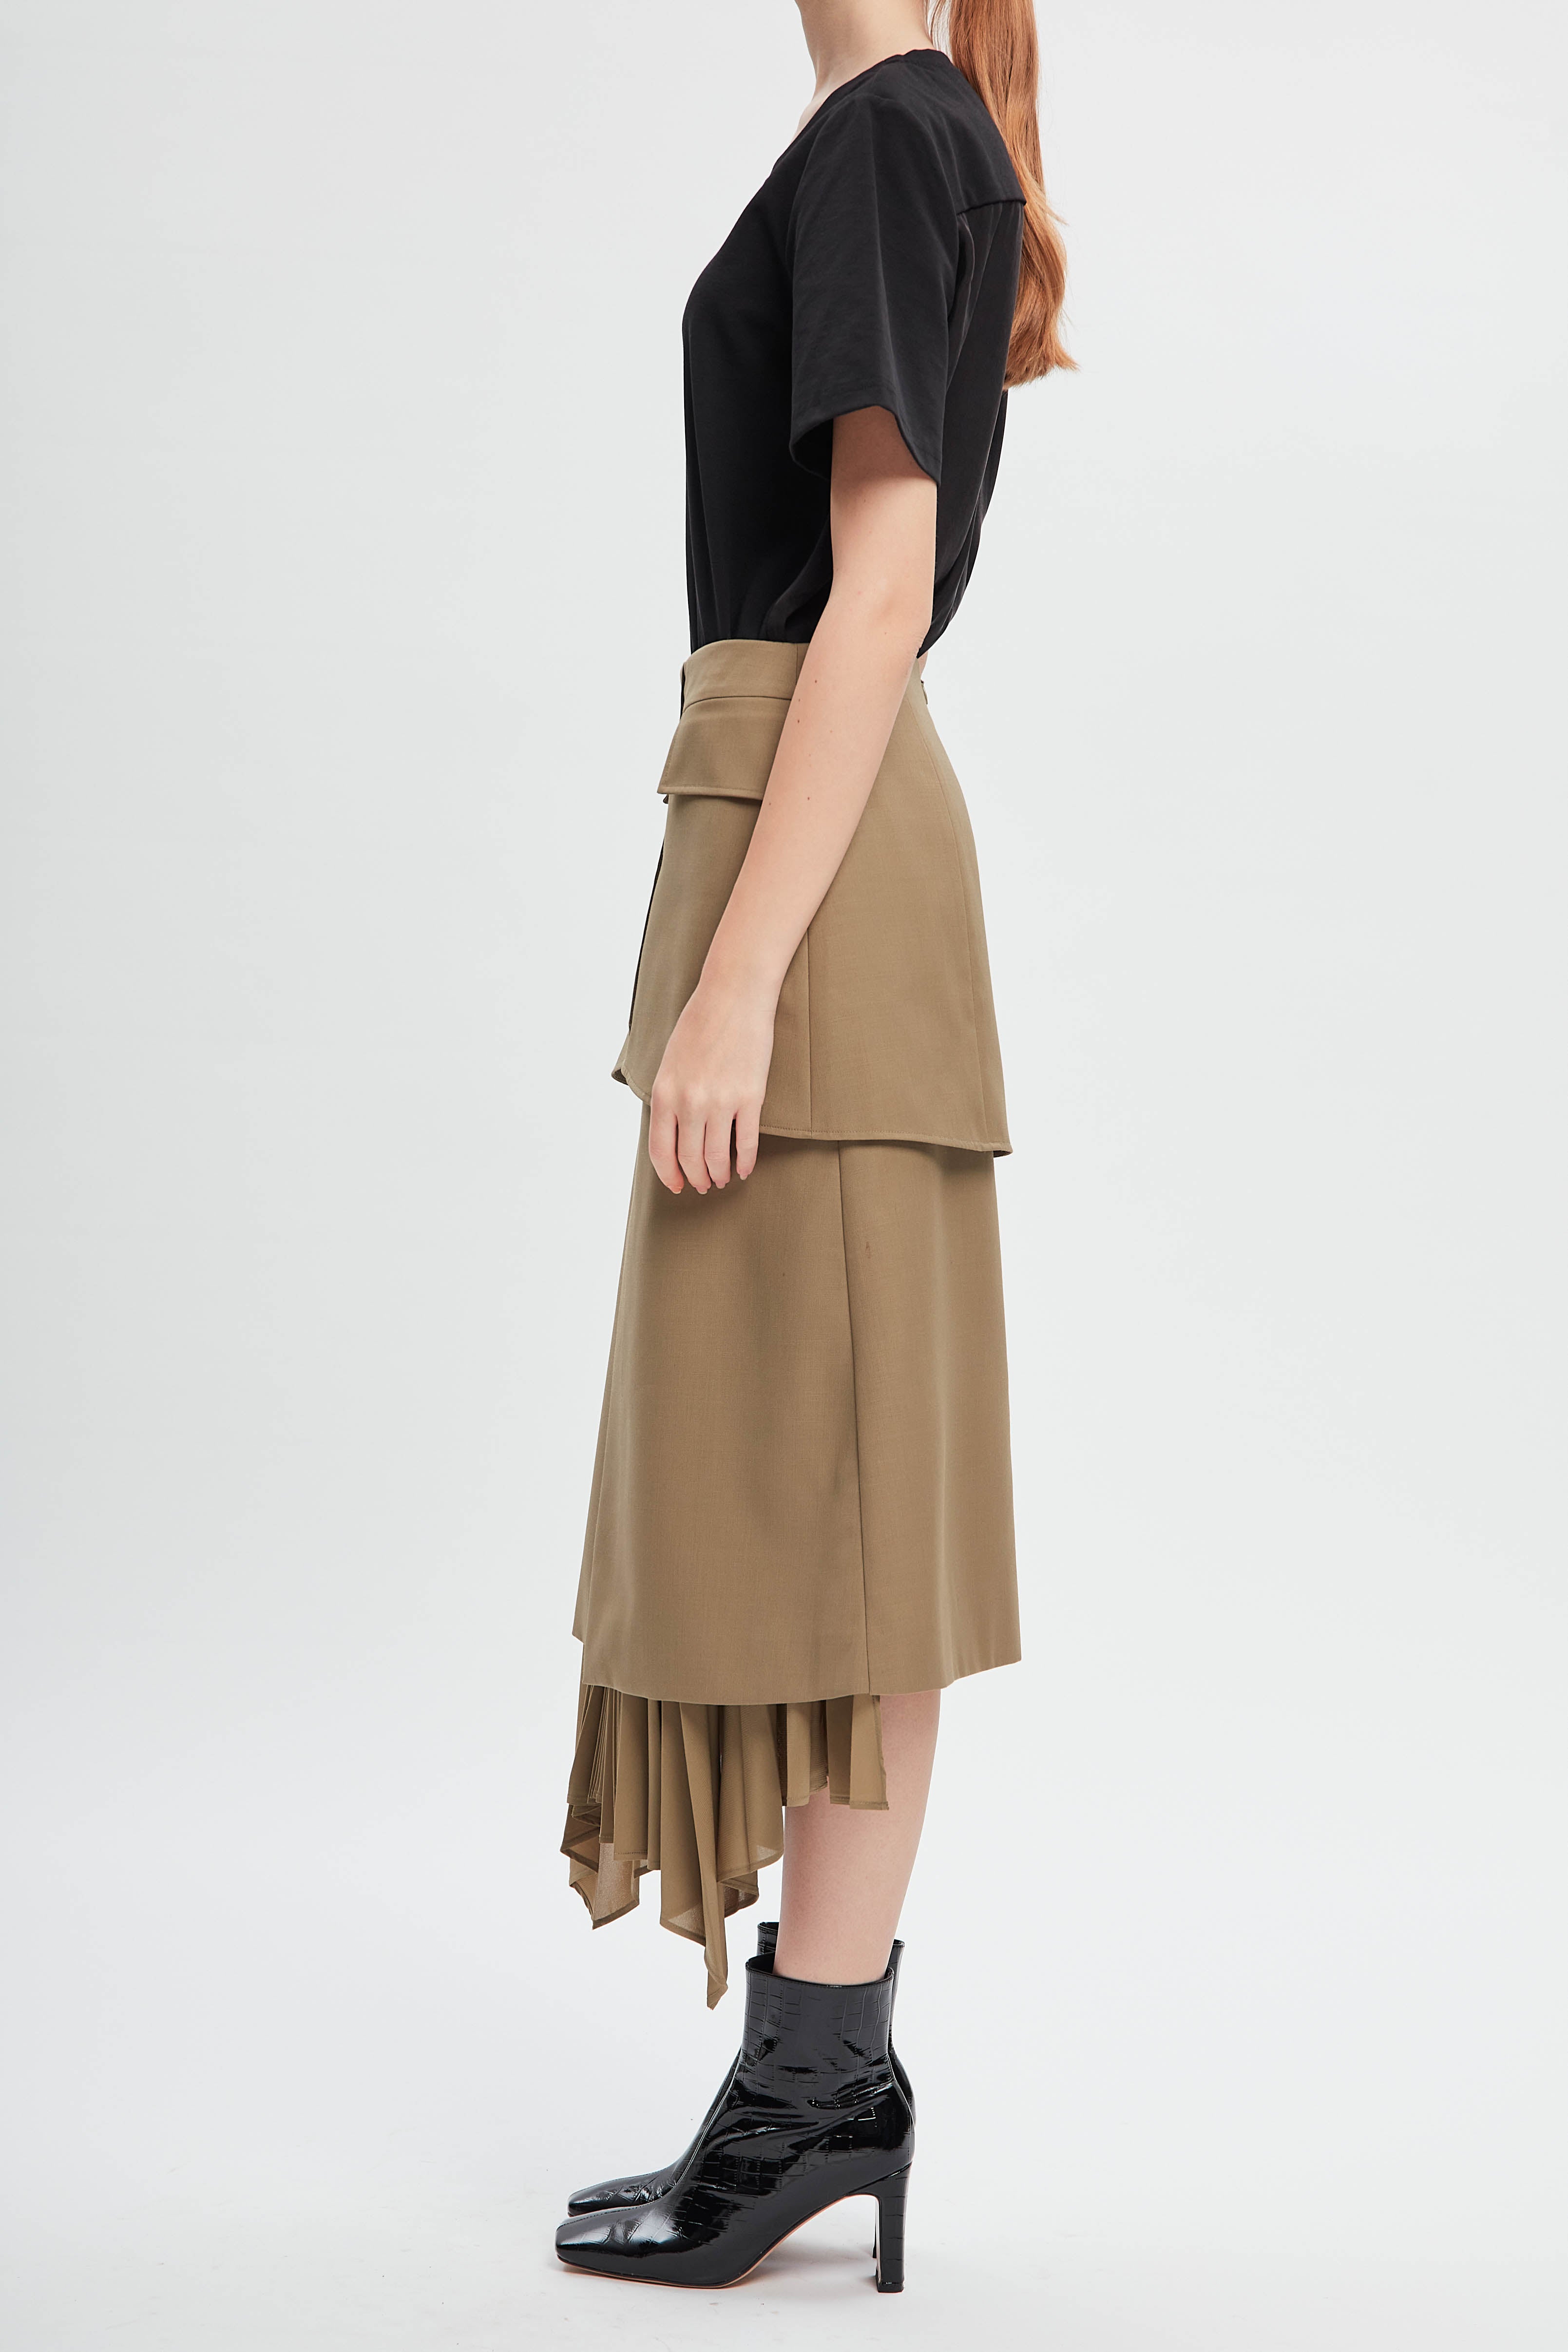 Ripple In The Water Pleating Skirt